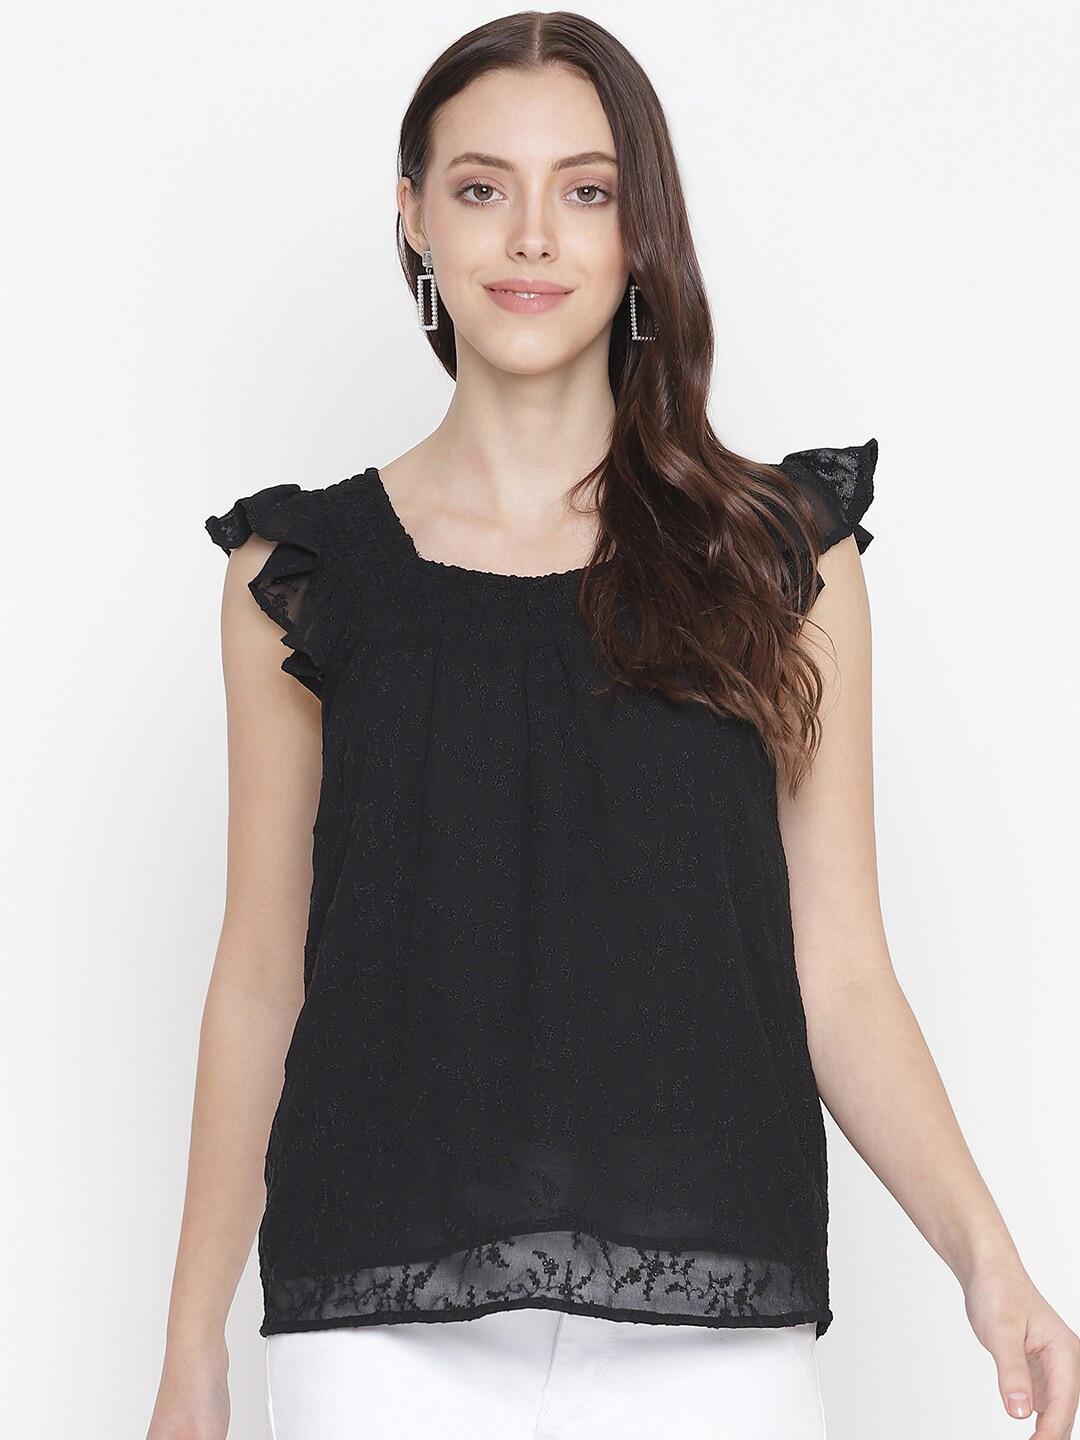 oxolloxo-black-floral-embroidered-top